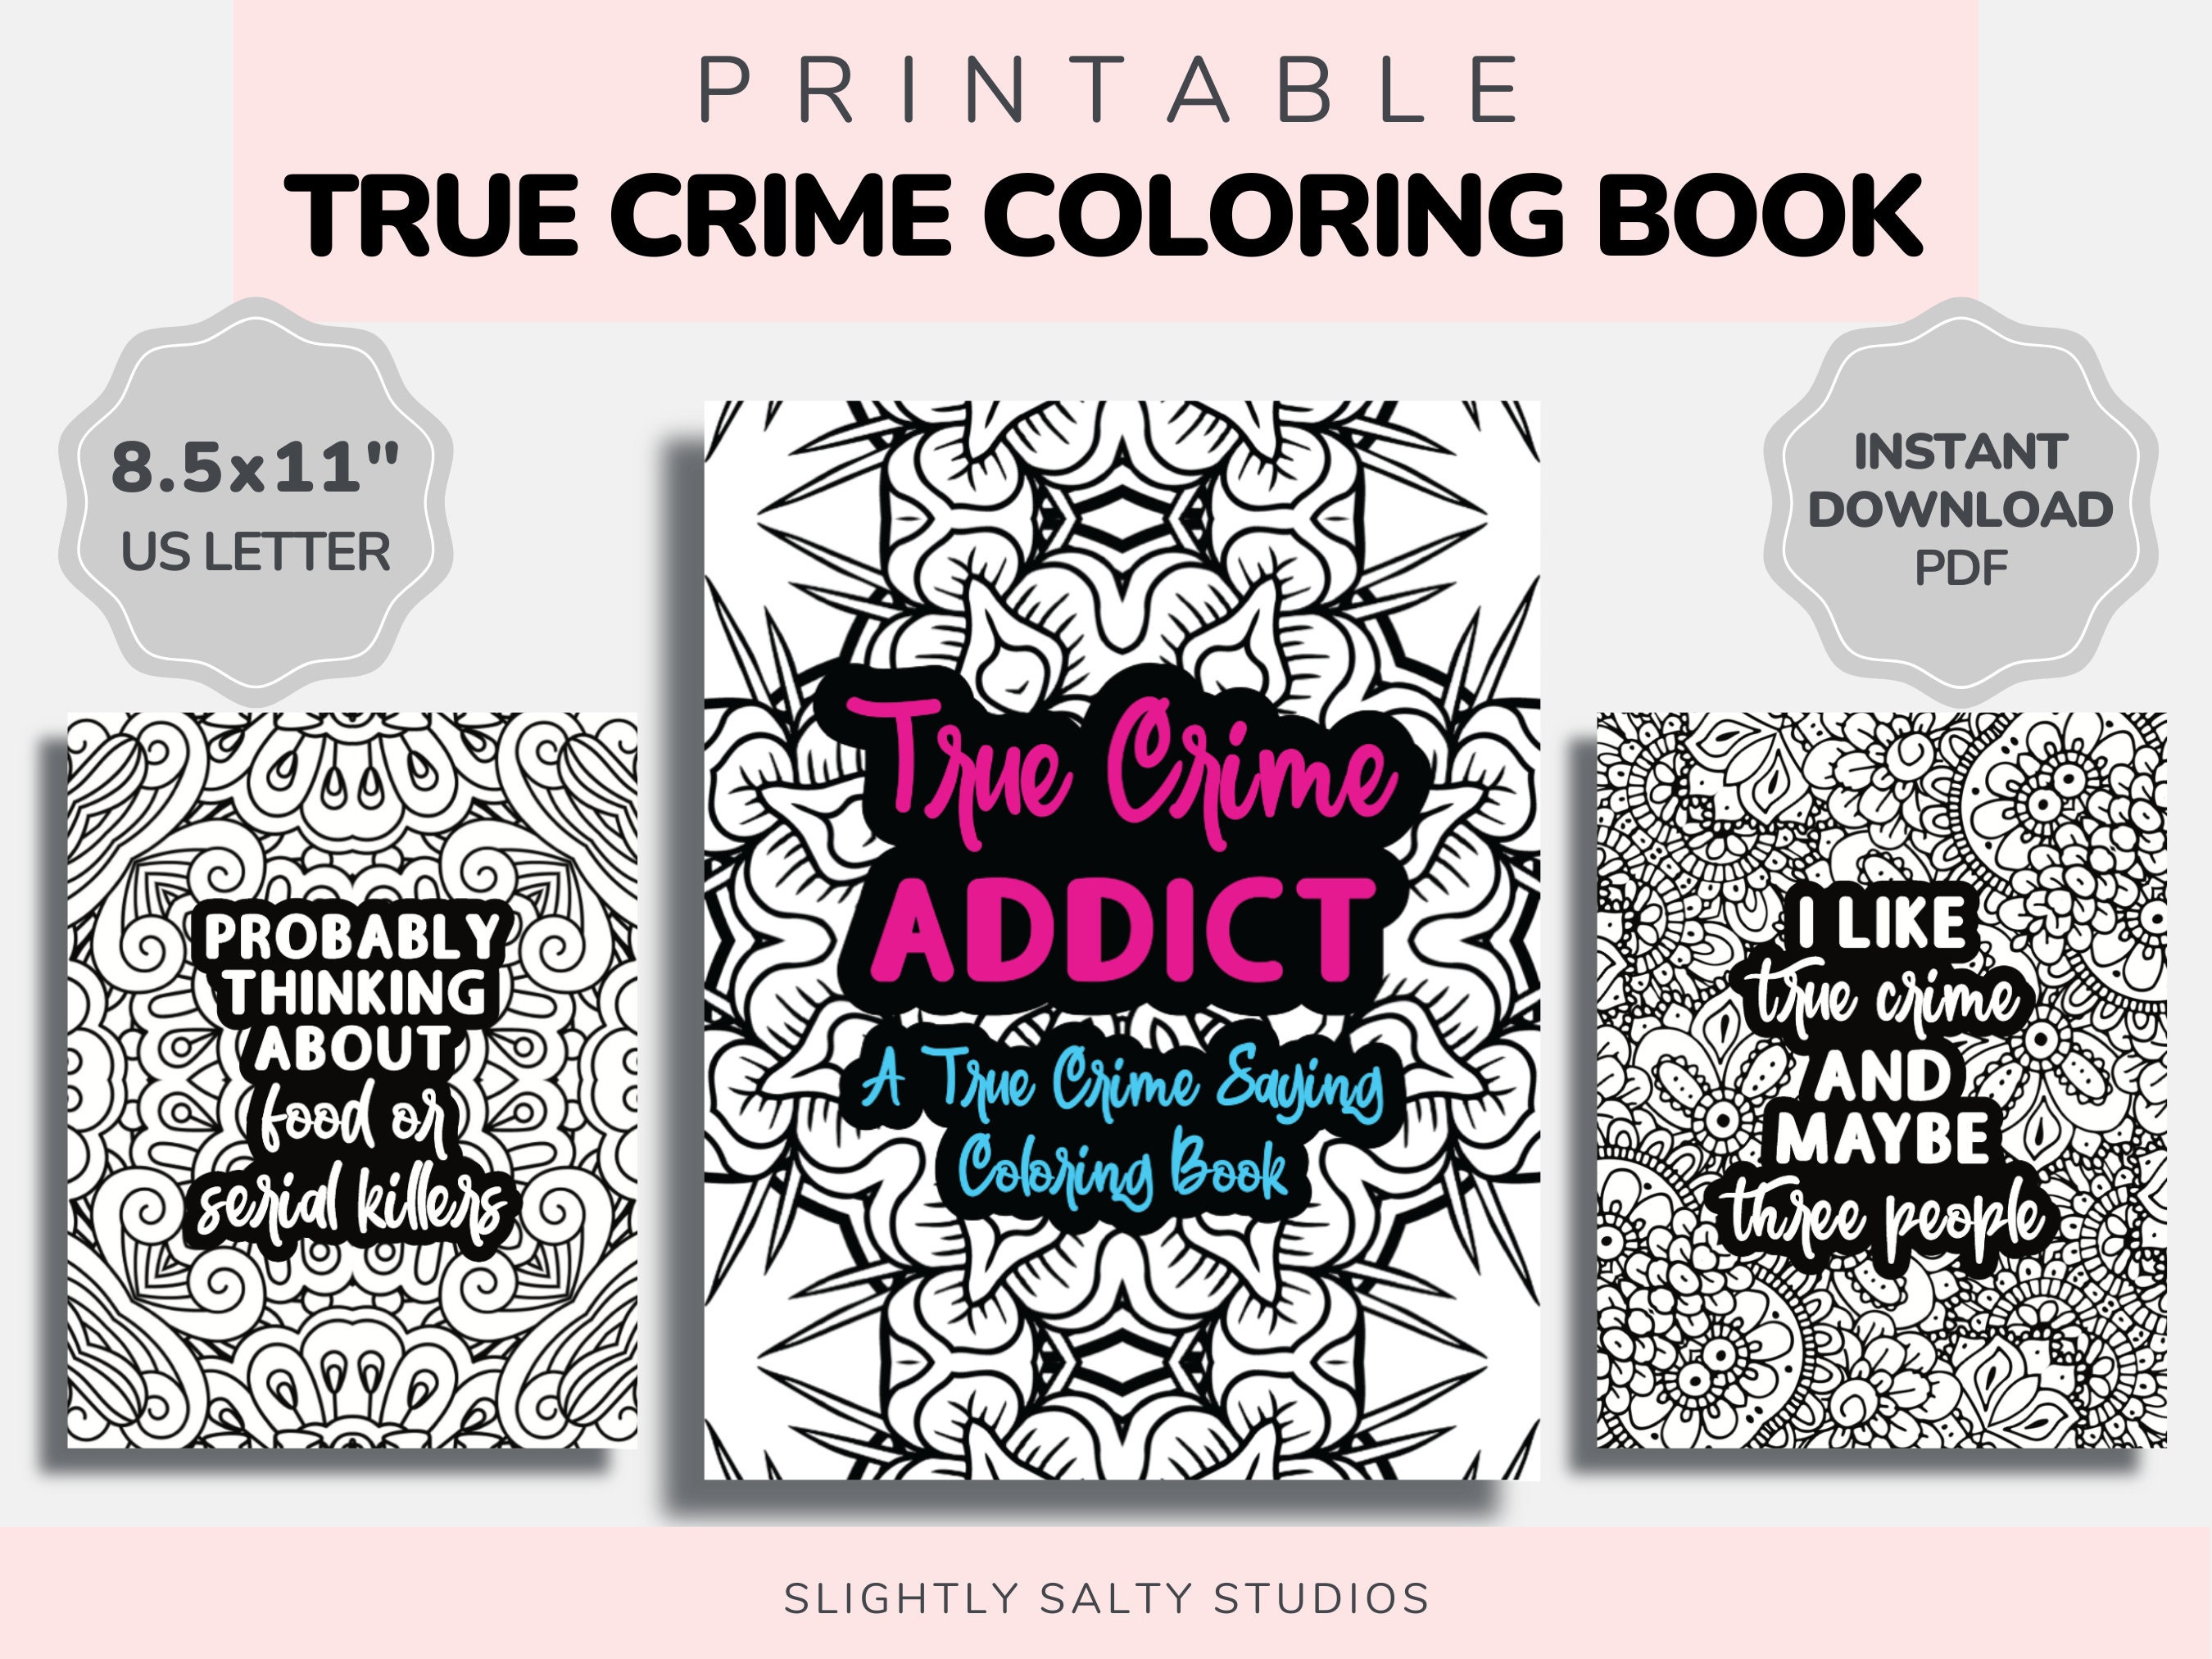 The Funniest Coloring Books for Humor and Relaxation in 2021 – SPY